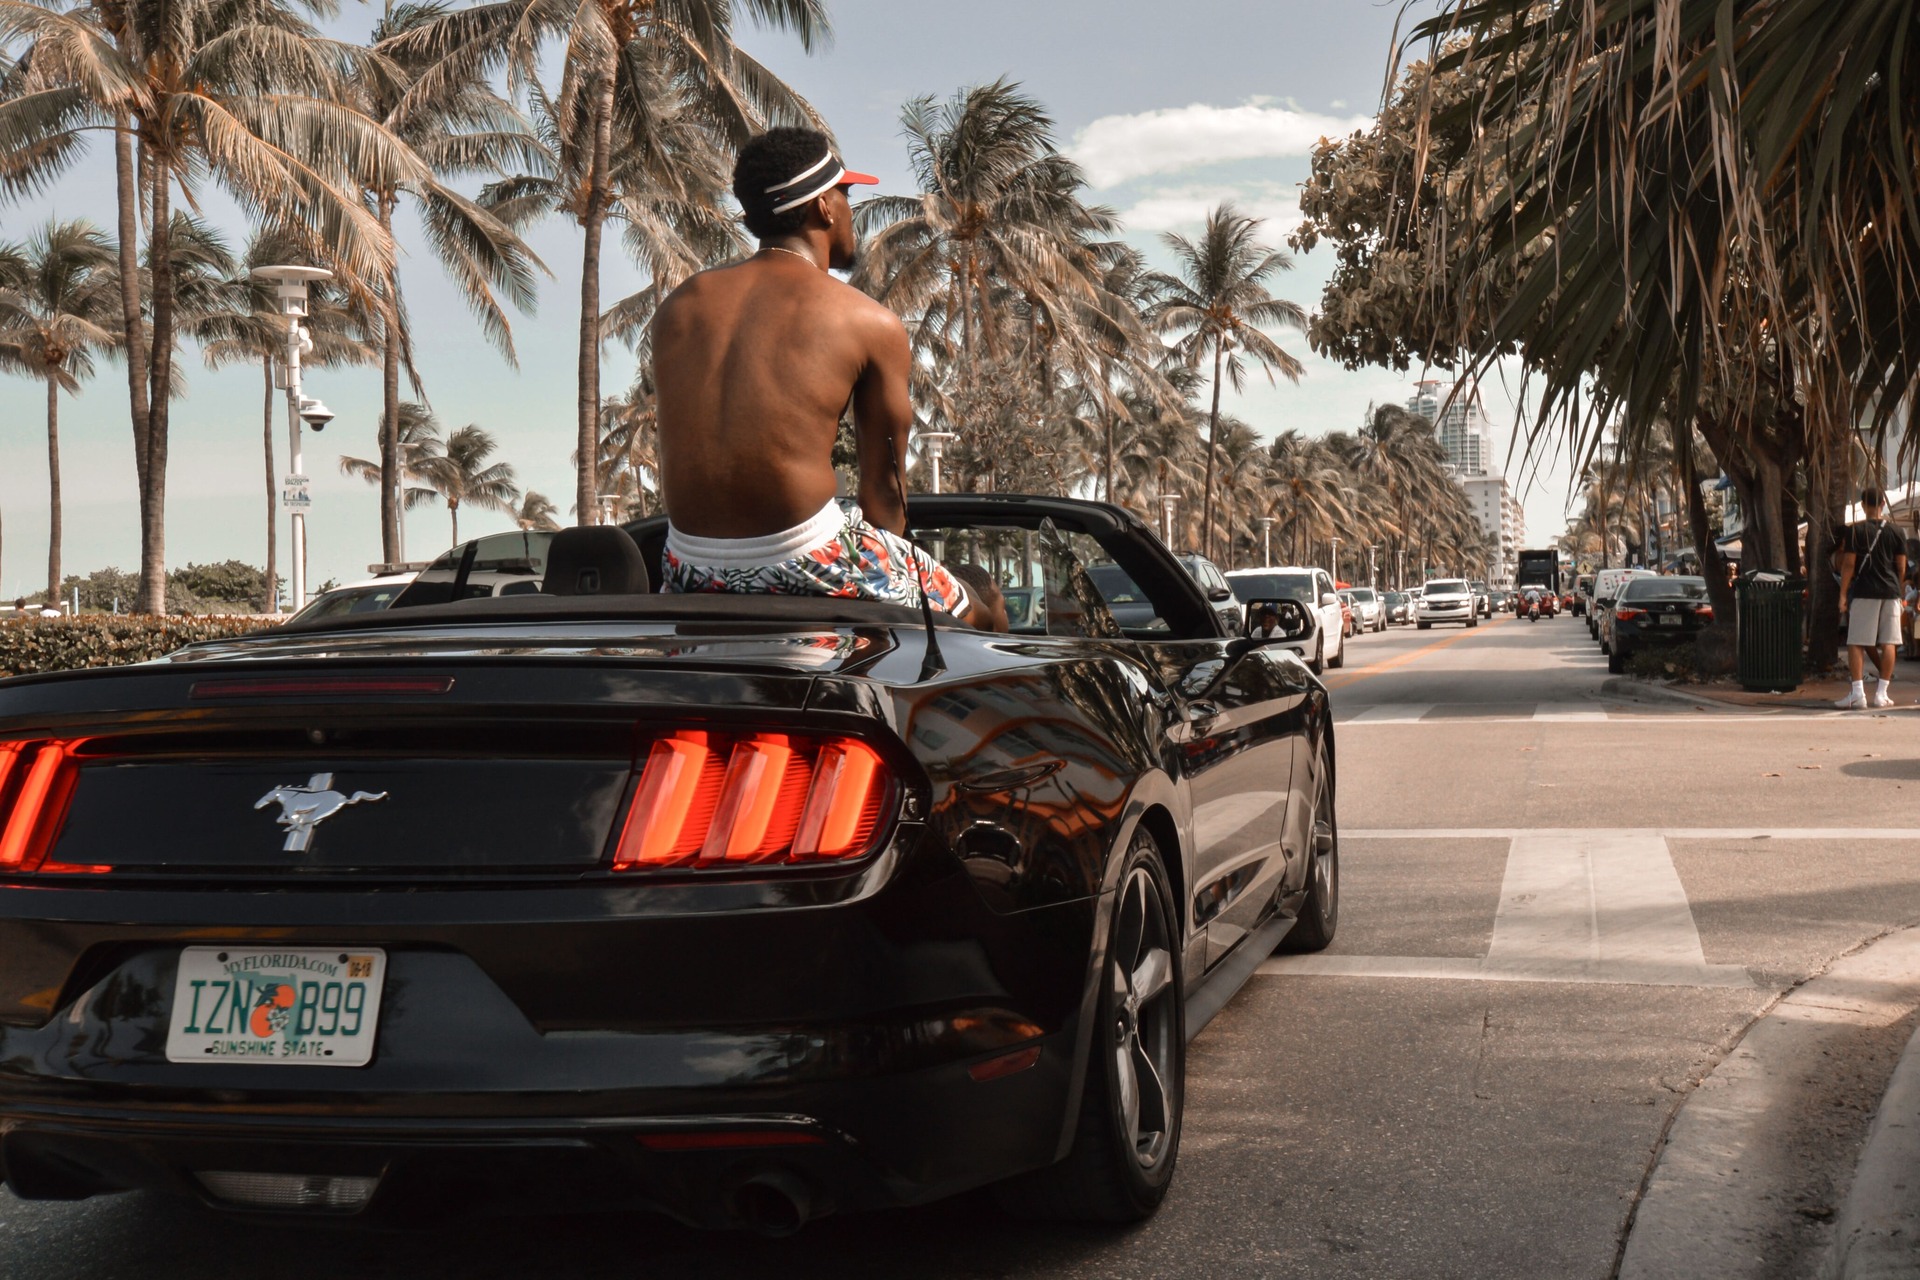 A shirtless man riding on the back of a car in Florida